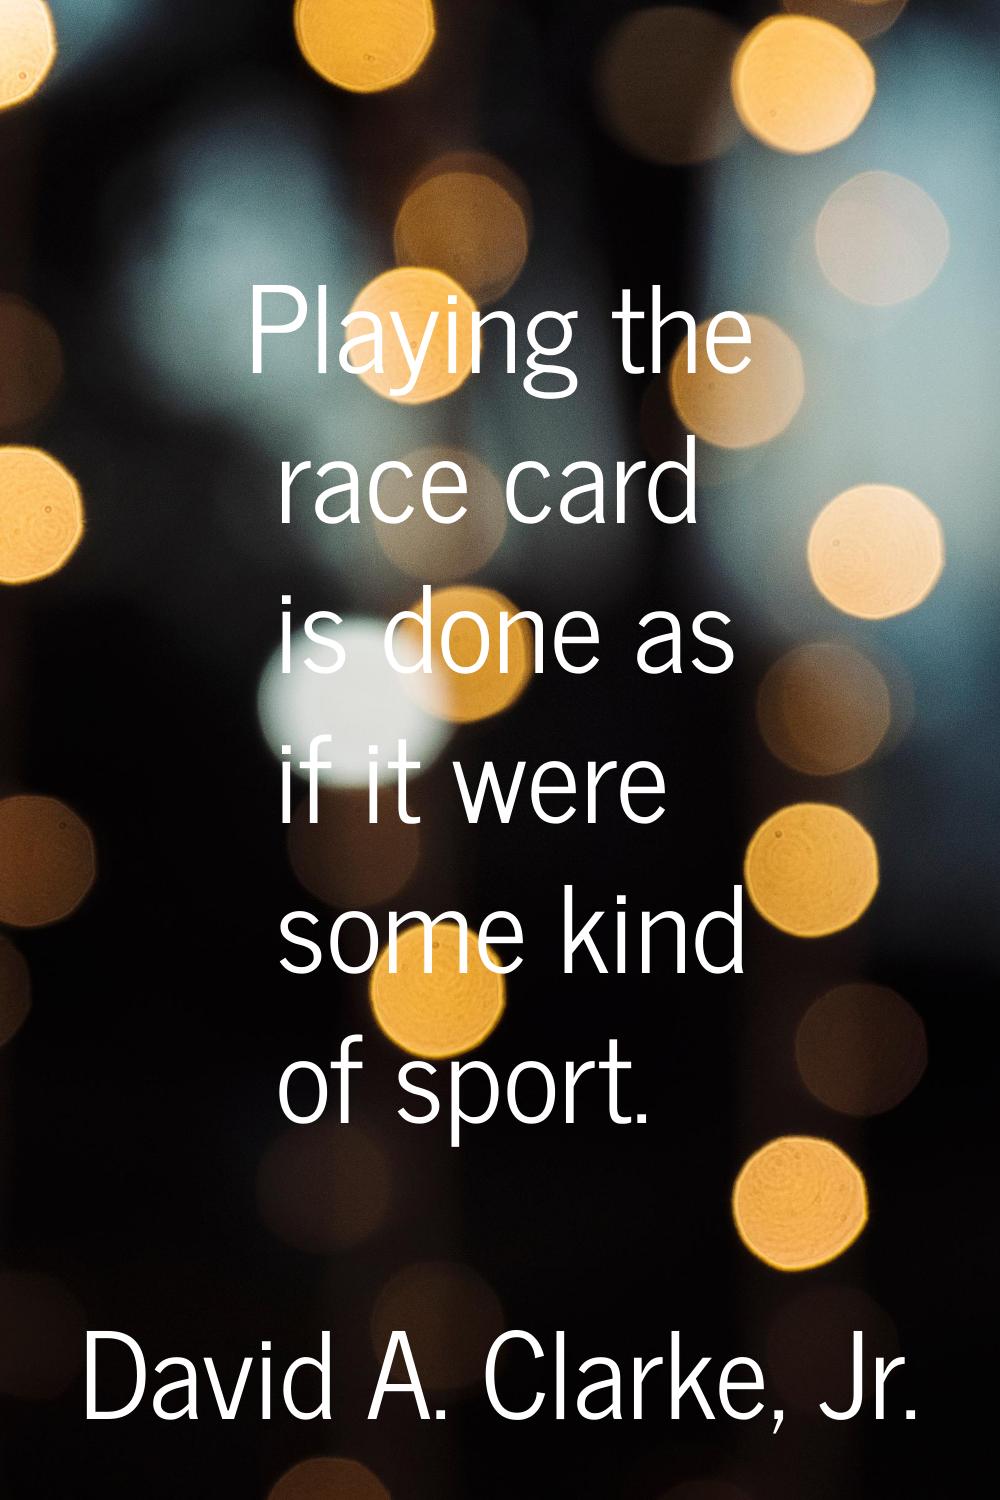 Playing the race card is done as if it were some kind of sport.